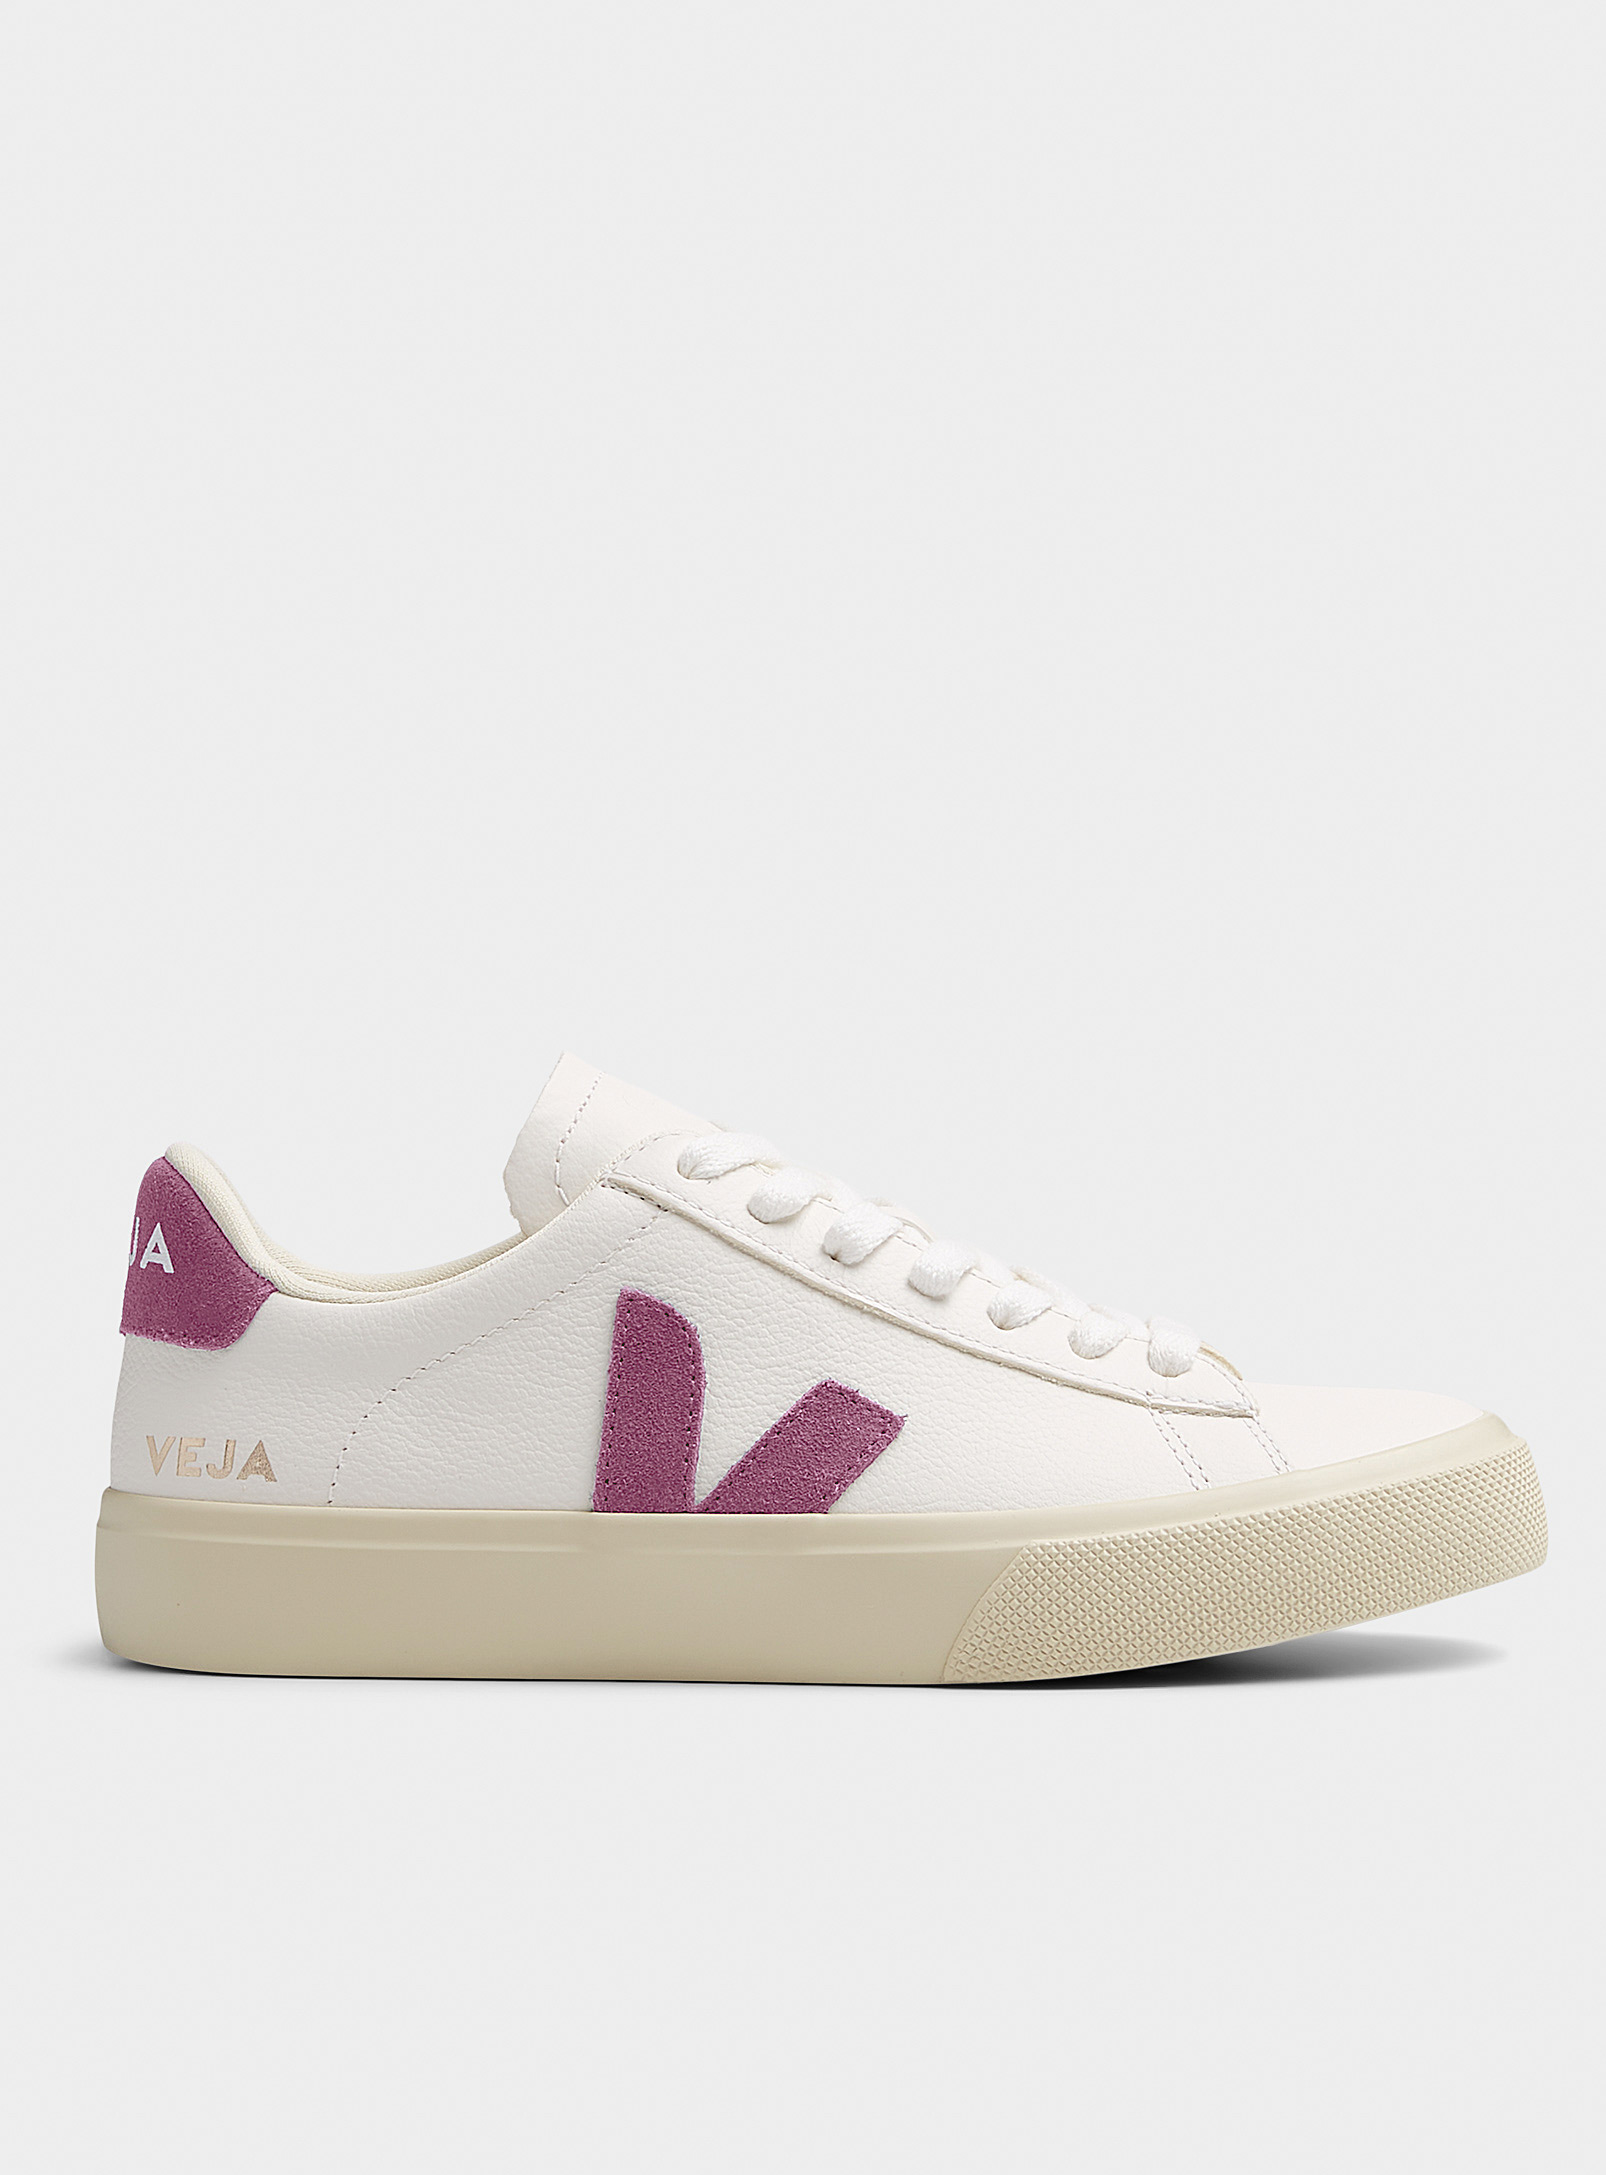 Veja Campo Sneakers Women In Pink